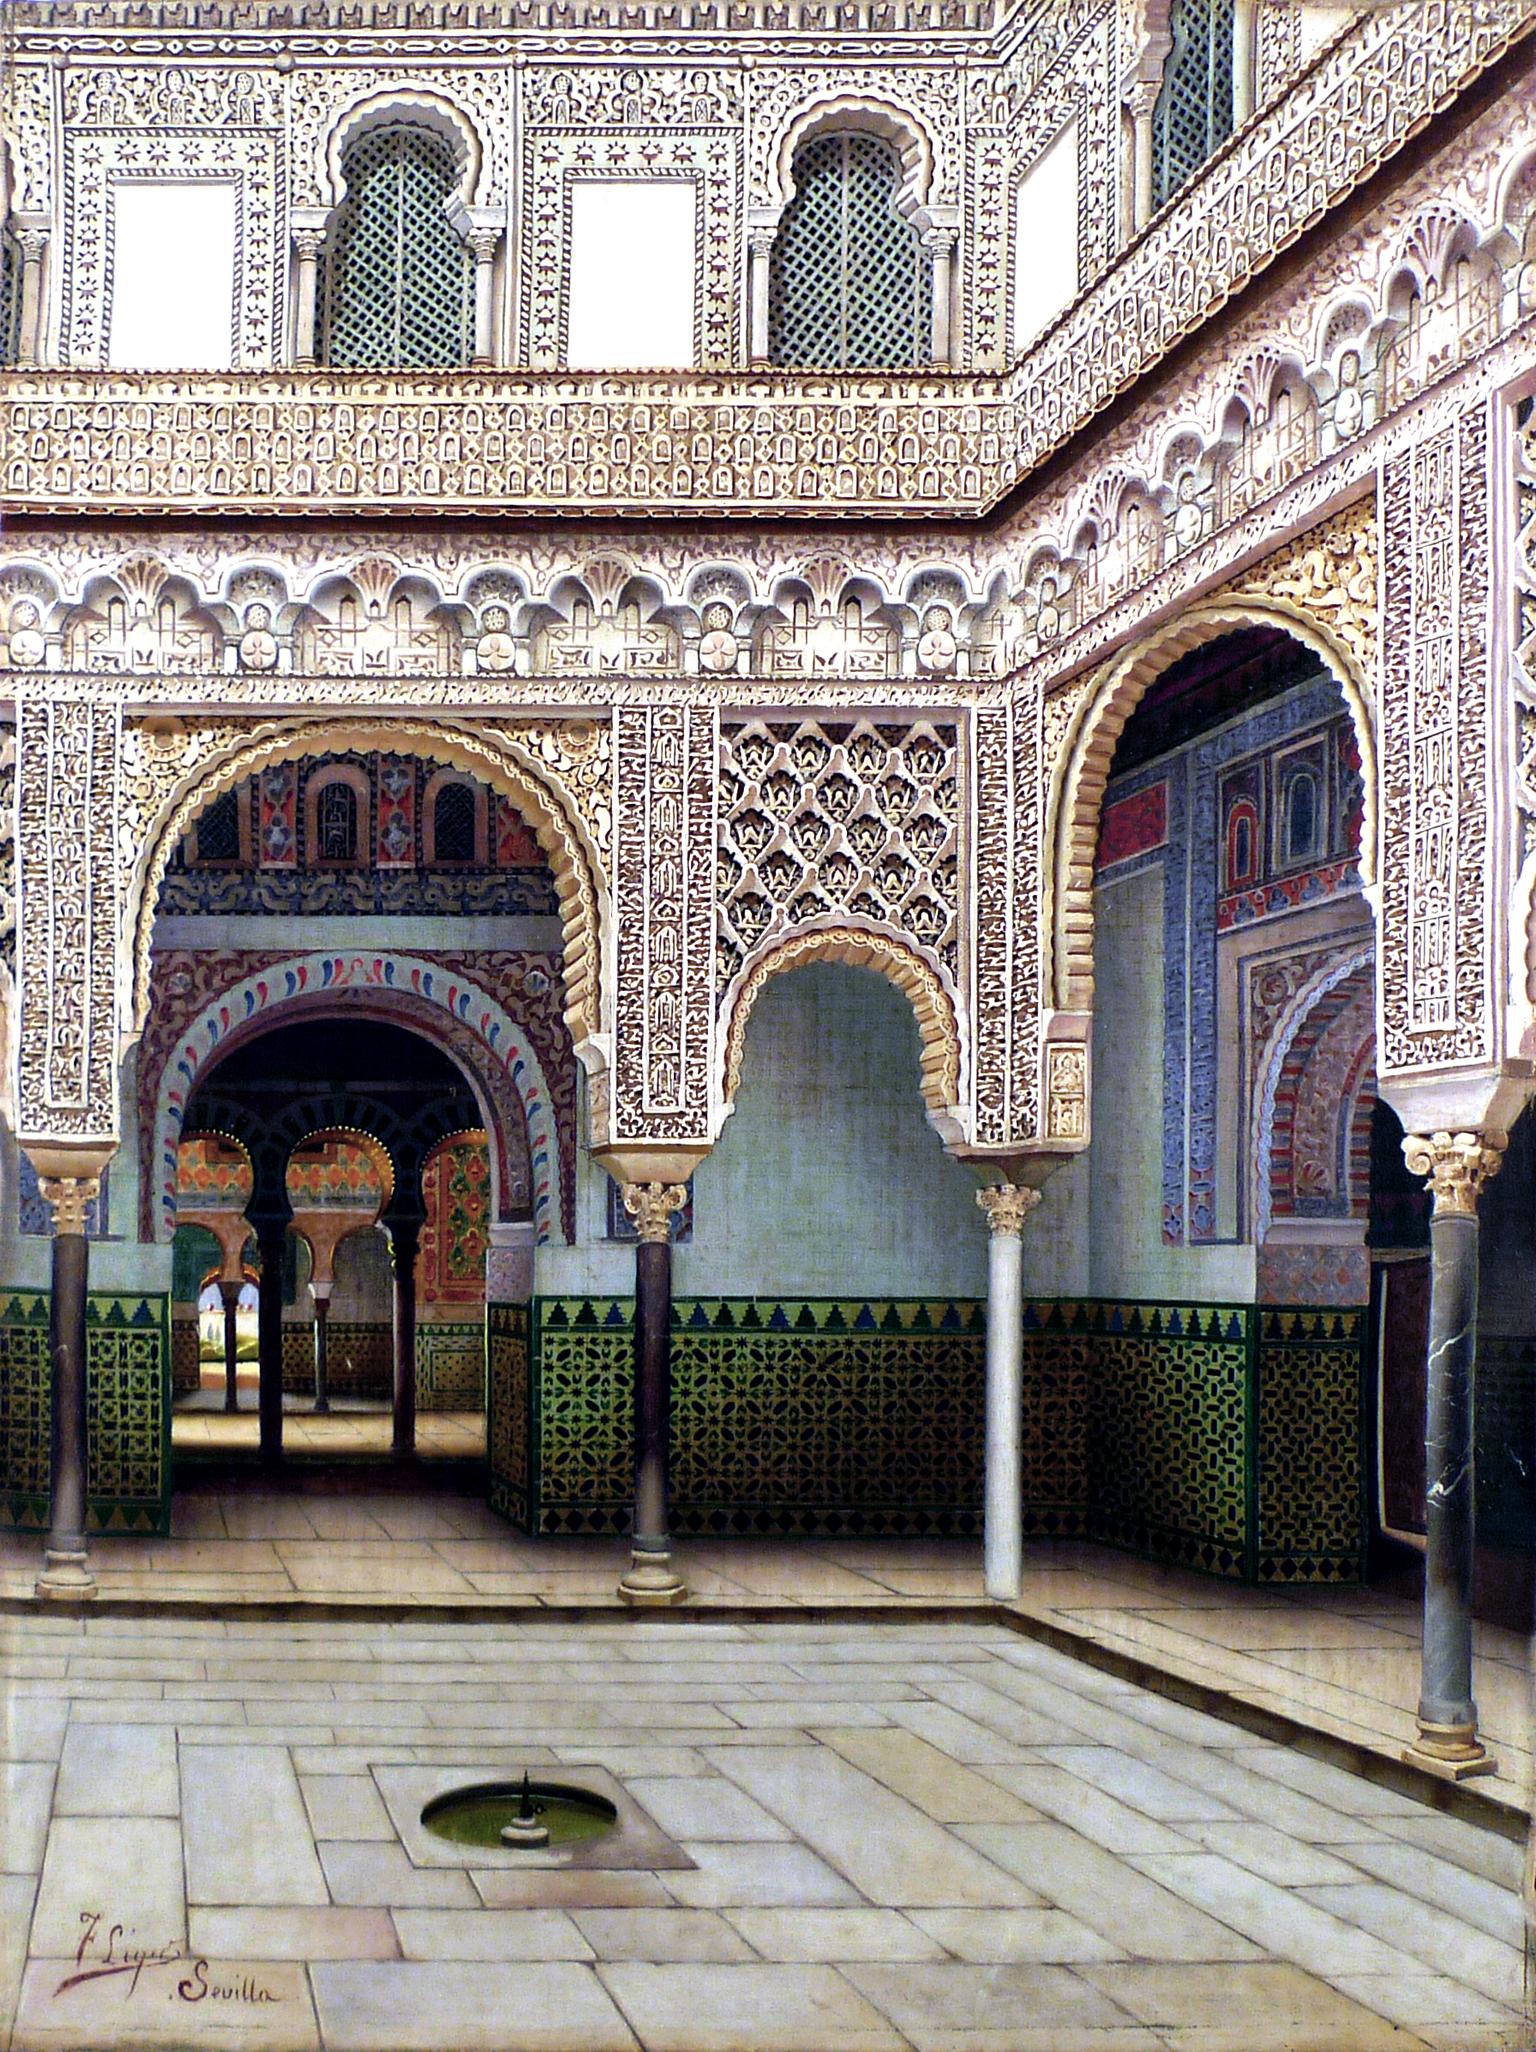 "Interior of Alcazar of Seville", Early 20th Century oil on canvas by F. Liger